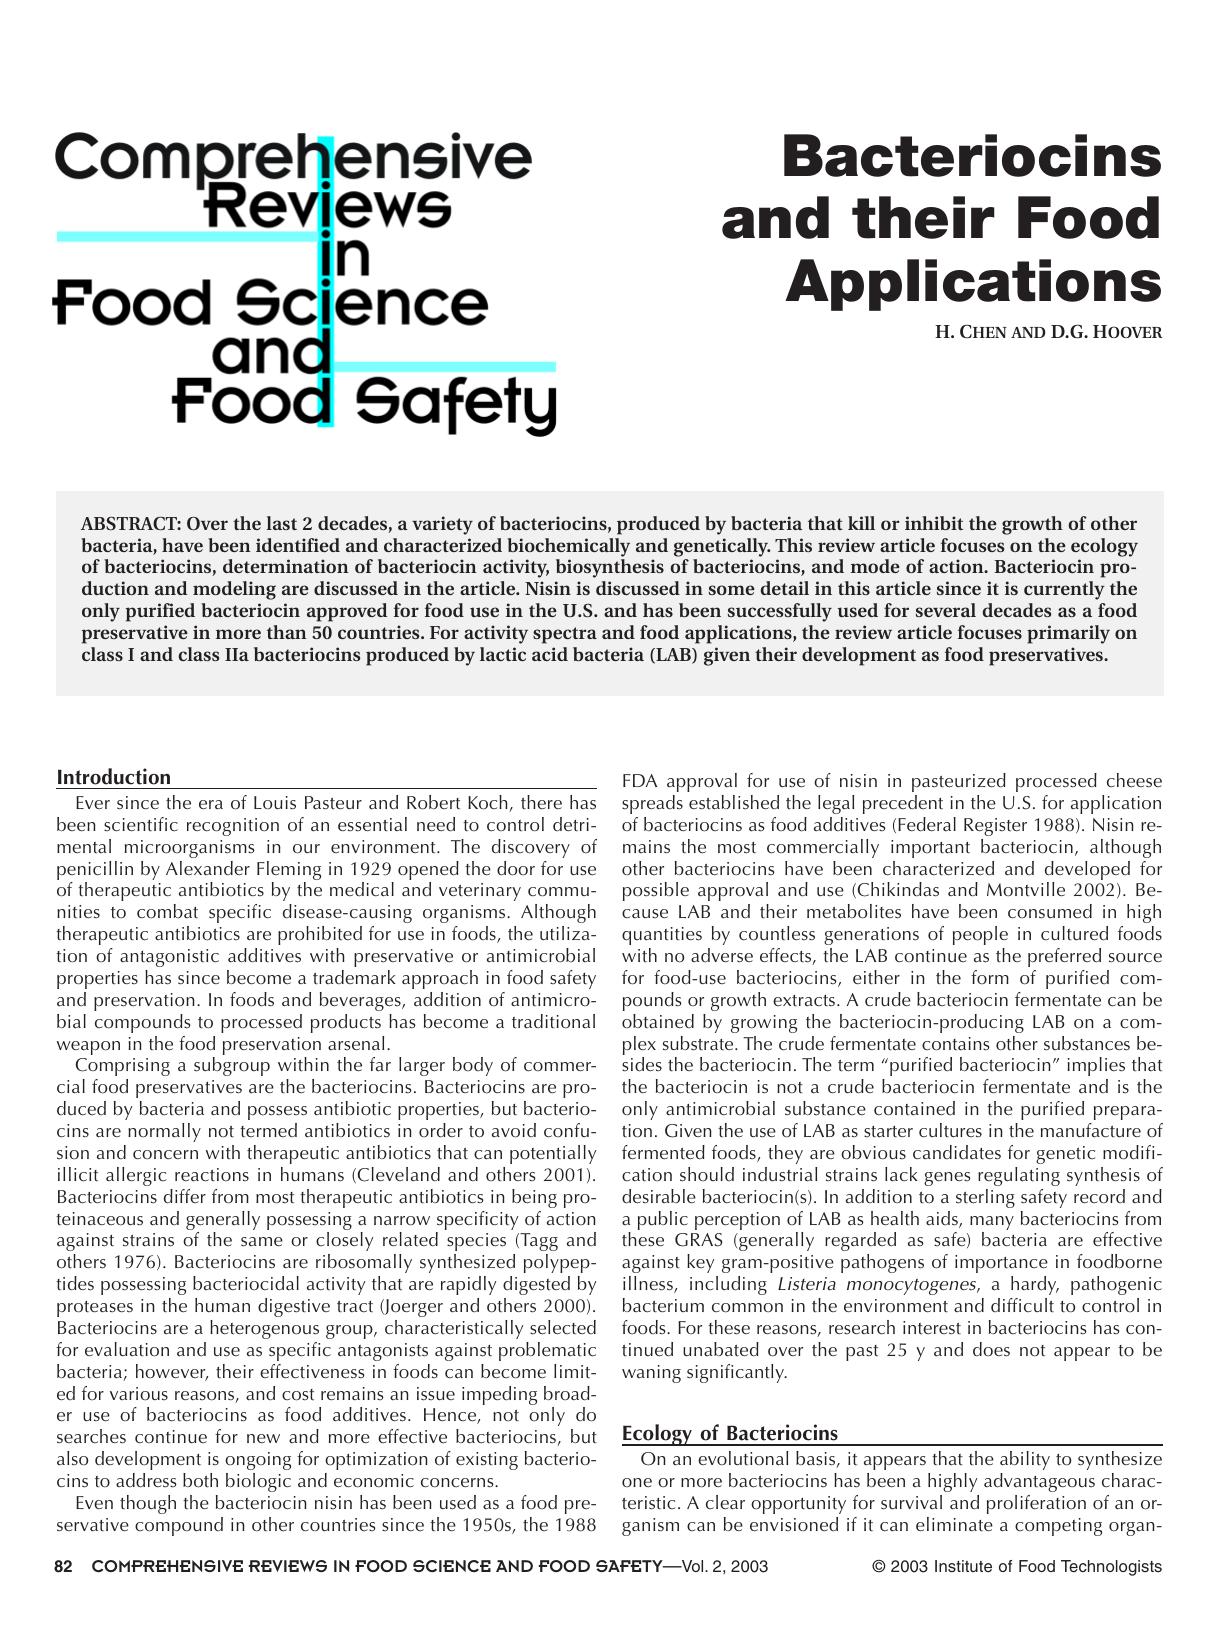 Bacteriocins and their Food Applications